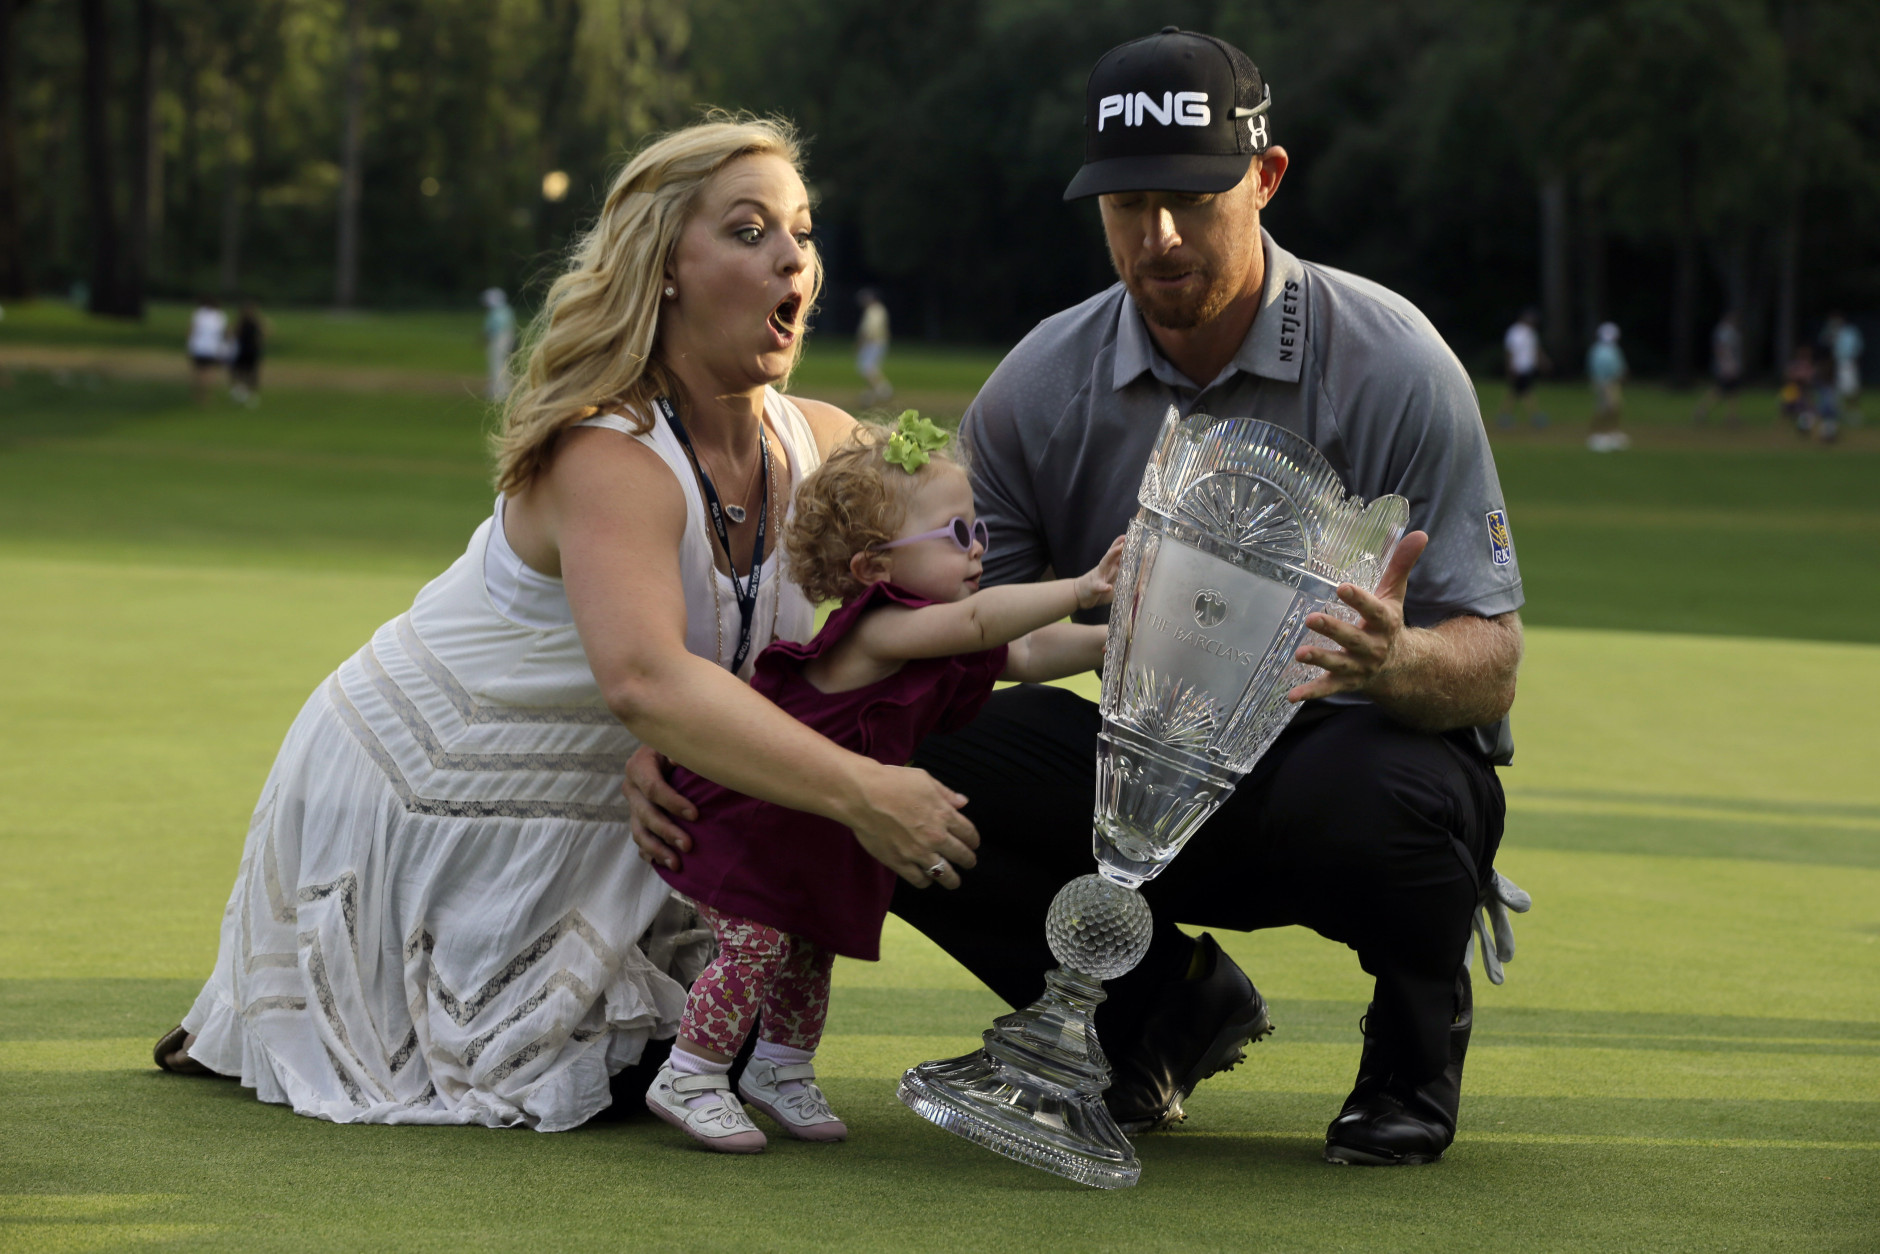 FOR USE AS DESIRED, YEAR END PHOTOS - FILE - Zoe Mahan, center, pushes the trophy as her mother Kandi  Mahan, left, grabs her while they pose with Hunter Mahan, husband,  father and winner of The Barclays golf tournament Sunday, Aug. 24, 2014, in Paramus, N.J. (AP Photo/Mel Evans, File)